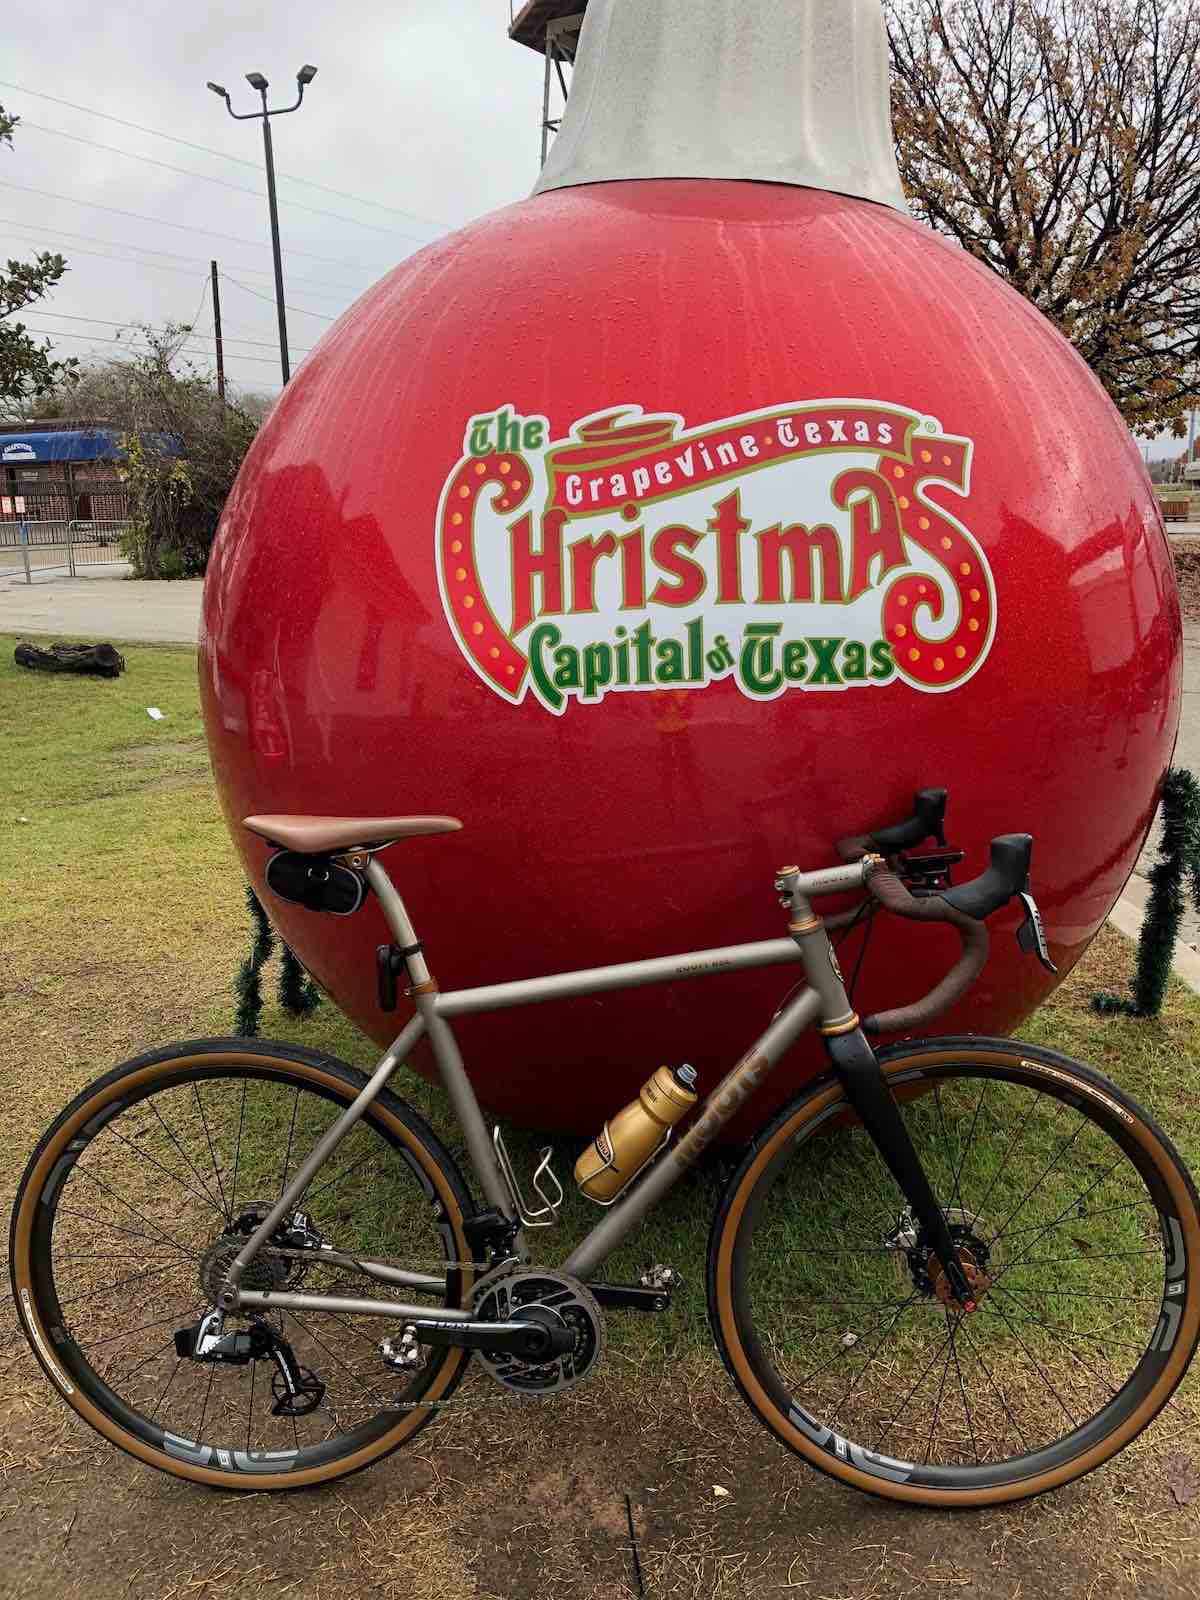 bikerumor pic of the day a bicycle leans against a giant red christmas ornament